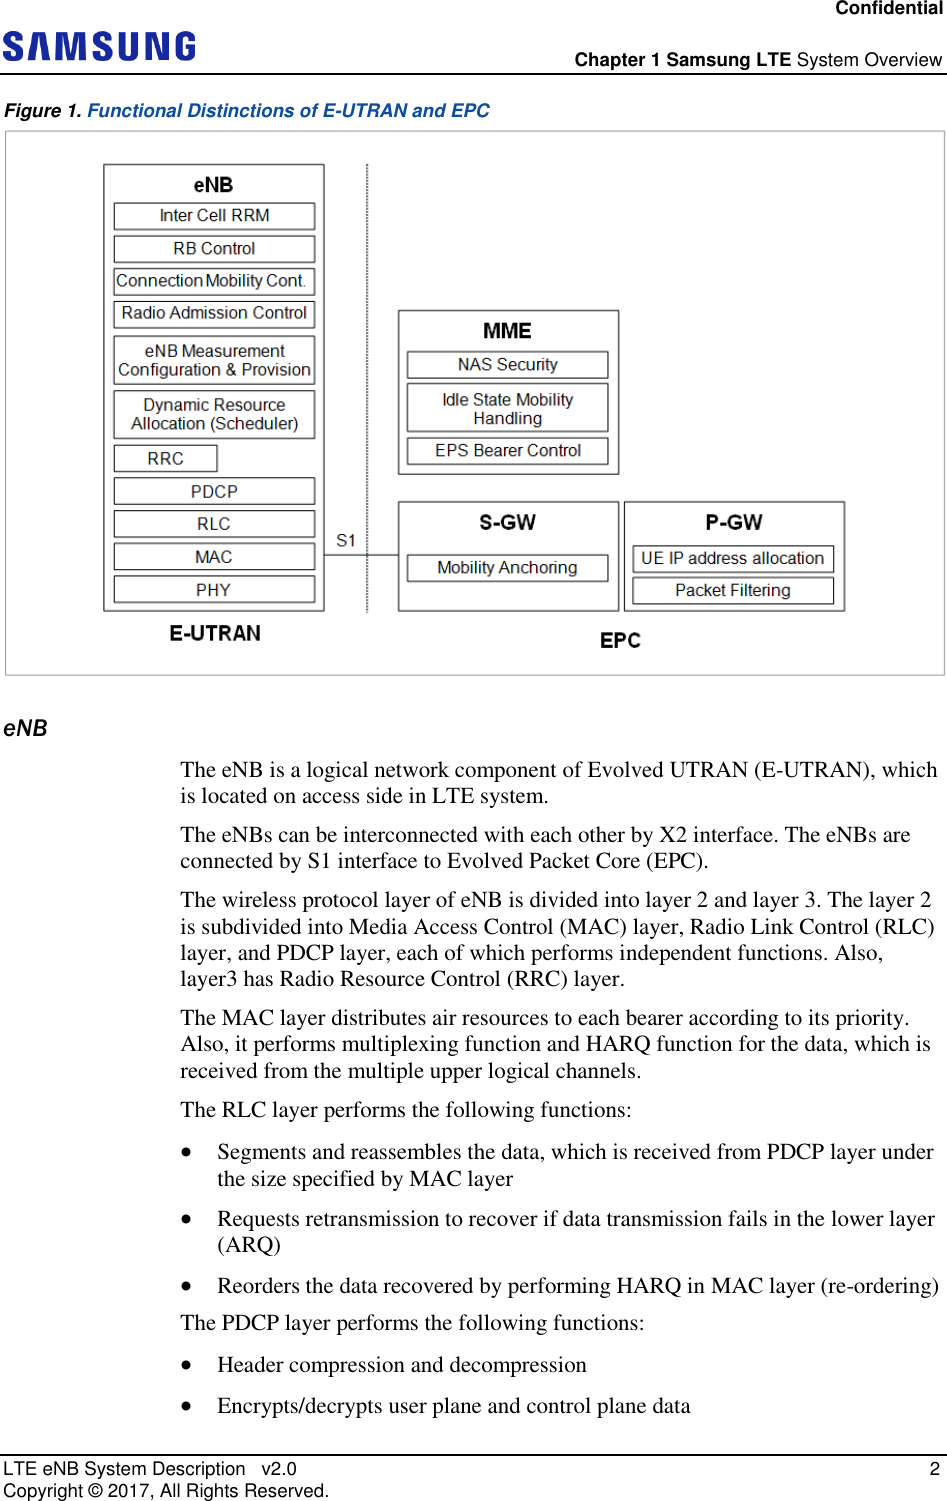 Confidential  Chapter 1 Samsung LTE System Overview LTE eNB System Description   v2.0    2 Copyright ©  2017, All Rights Reserved. Figure 1. Functional Distinctions of E-UTRAN and EPC  eNB The eNB is a logical network component of Evolved UTRAN (E-UTRAN), which is located on access side in LTE system. The eNBs can be interconnected with each other by X2 interface. The eNBs are connected by S1 interface to Evolved Packet Core (EPC). The wireless protocol layer of eNB is divided into layer 2 and layer 3. The layer 2 is subdivided into Media Access Control (MAC) layer, Radio Link Control (RLC) layer, and PDCP layer, each of which performs independent functions. Also, layer3 has Radio Resource Control (RRC) layer. The MAC layer distributes air resources to each bearer according to its priority. Also, it performs multiplexing function and HARQ function for the data, which is received from the multiple upper logical channels. The RLC layer performs the following functions:  Segments and reassembles the data, which is received from PDCP layer under the size specified by MAC layer  Requests retransmission to recover if data transmission fails in the lower layer (ARQ)  Reorders the data recovered by performing HARQ in MAC layer (re-ordering) The PDCP layer performs the following functions:  Header compression and decompression  Encrypts/decrypts user plane and control plane data 